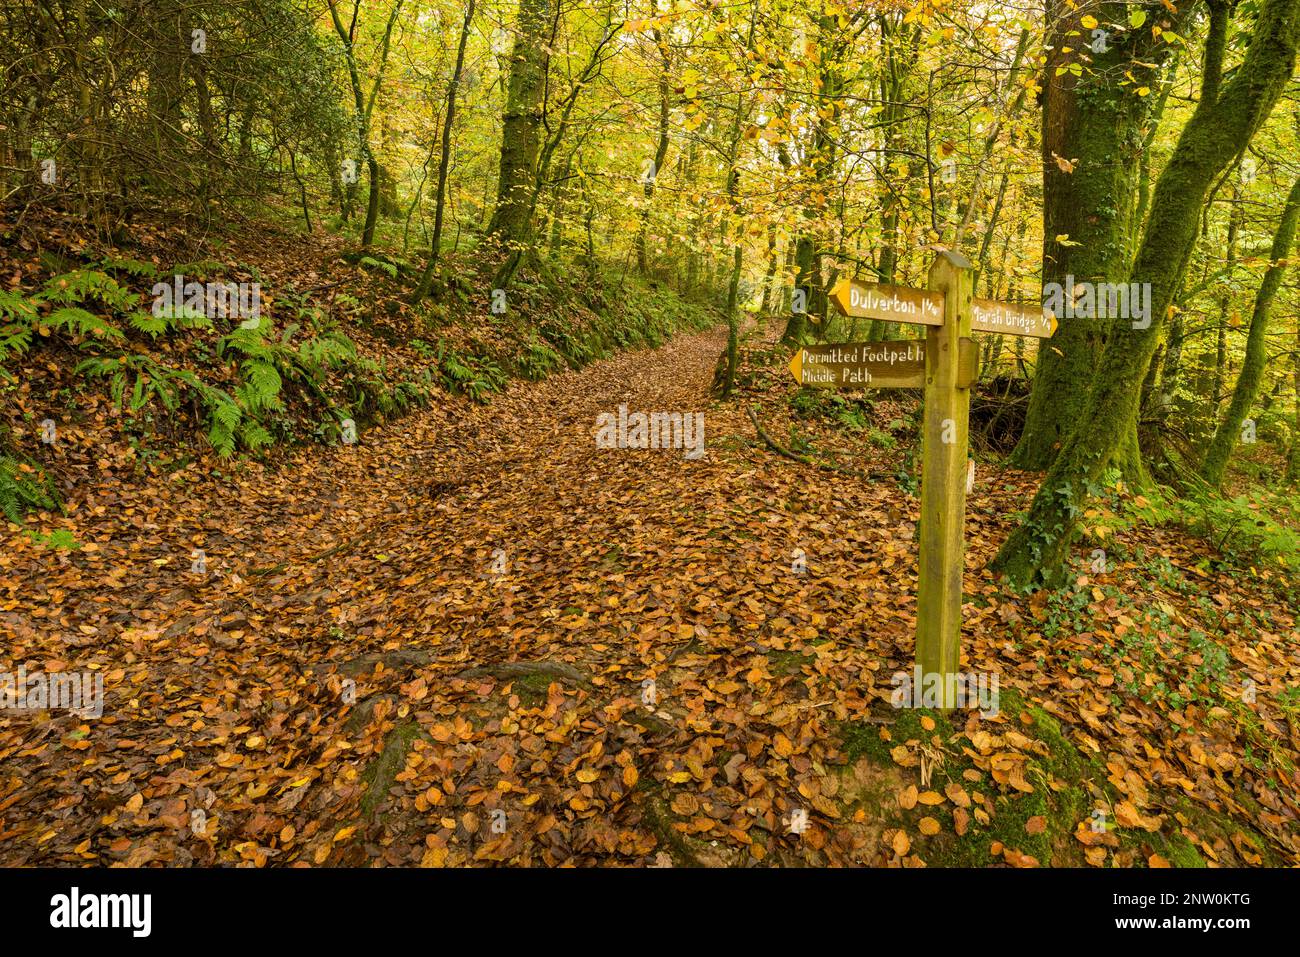 A footpath sign in an autumnal Old Berry Wood in the Barle valley near Burridge Woods at Dulverton, Exmoor National Park, Somerset, England. Stock Photo